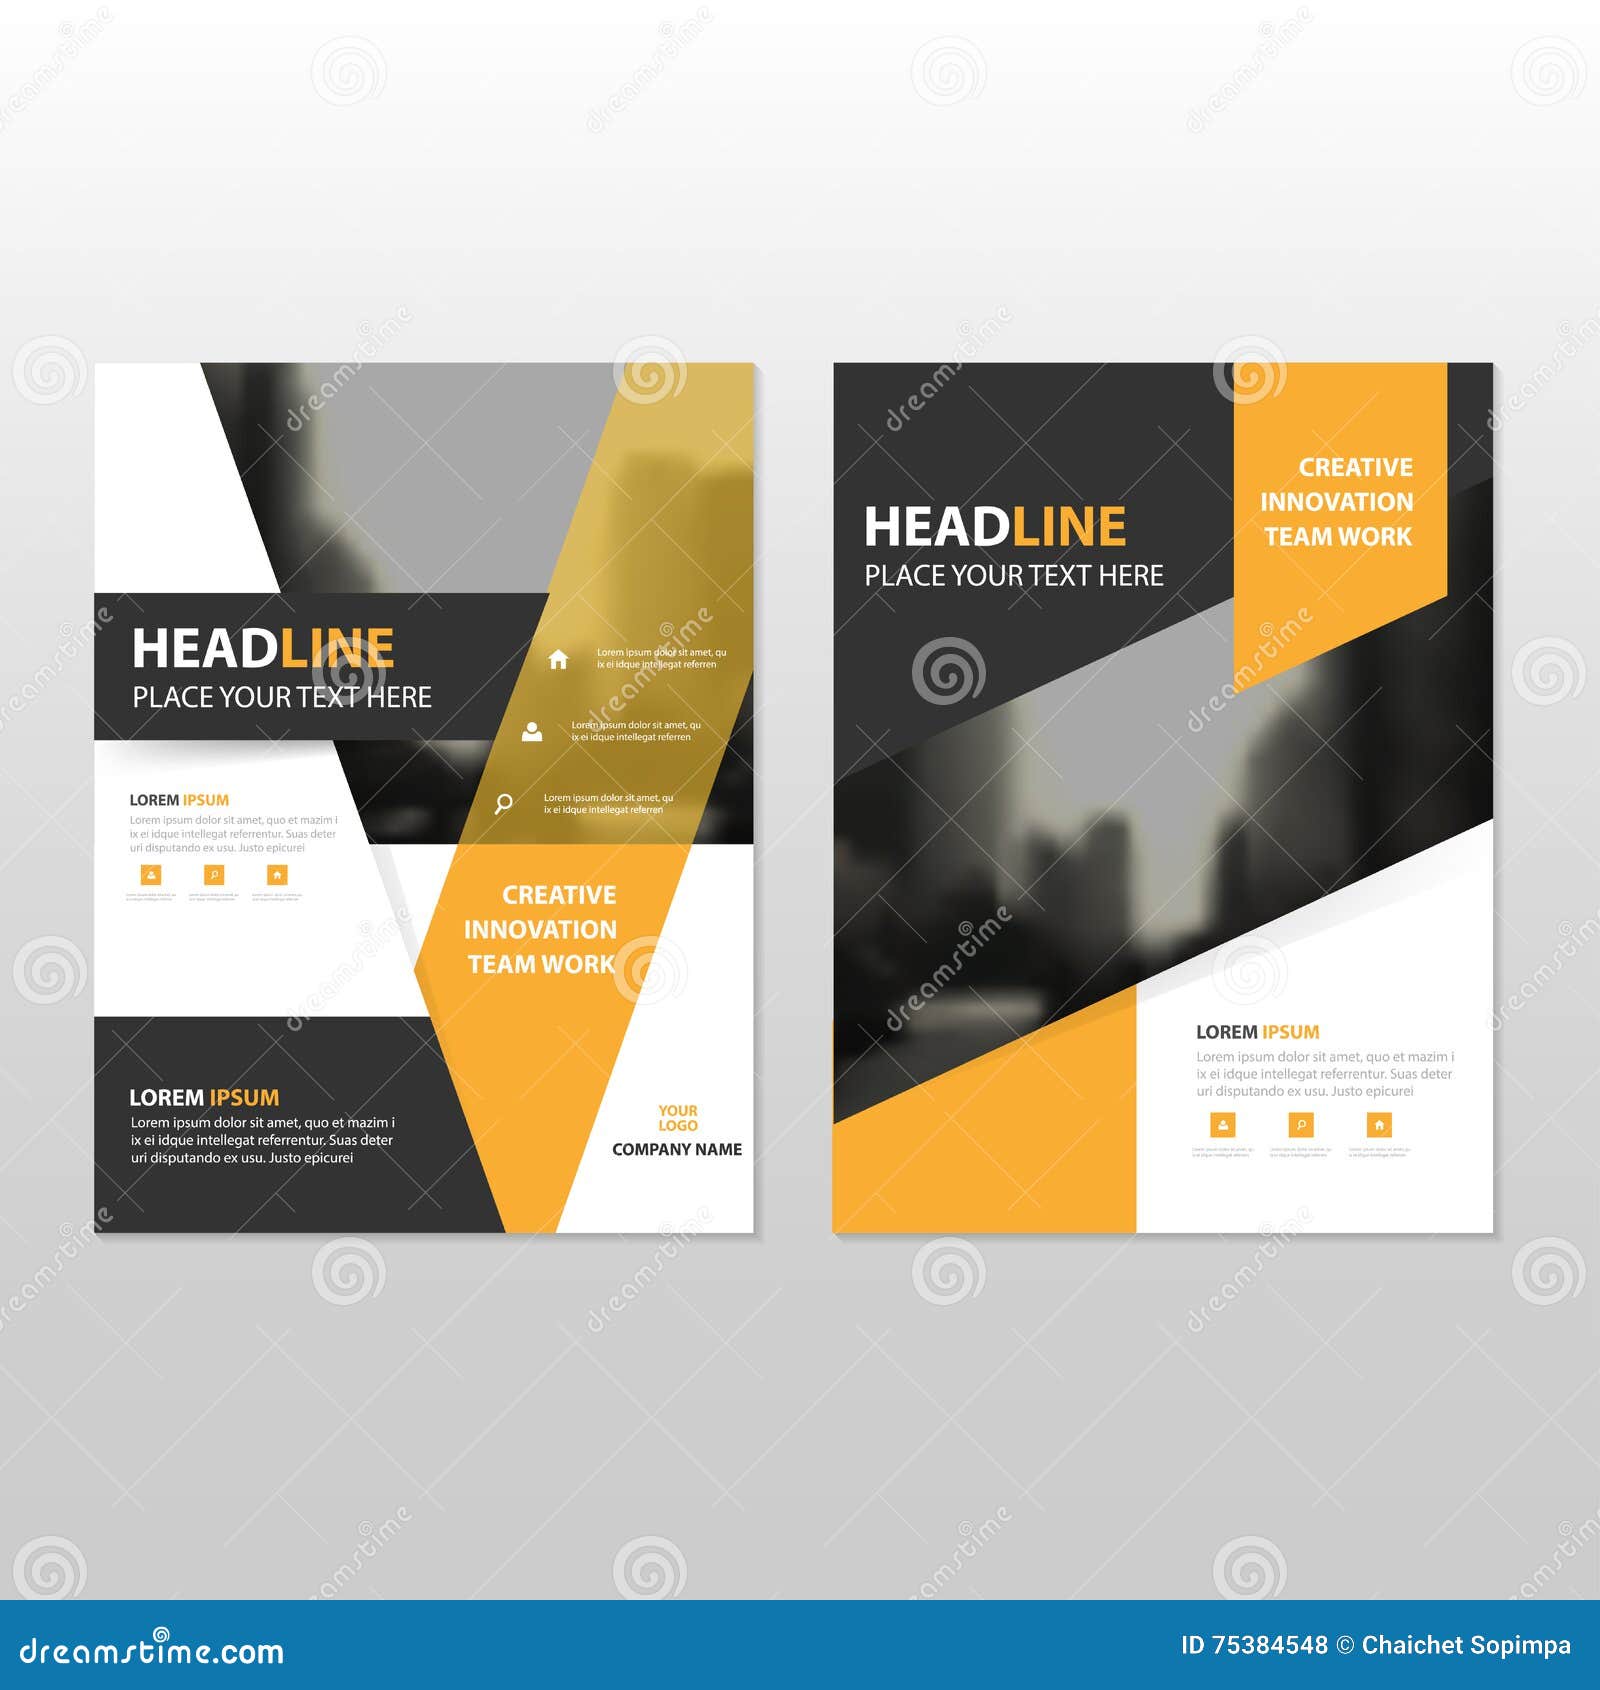 Report Design: Best Practices and Guidelines